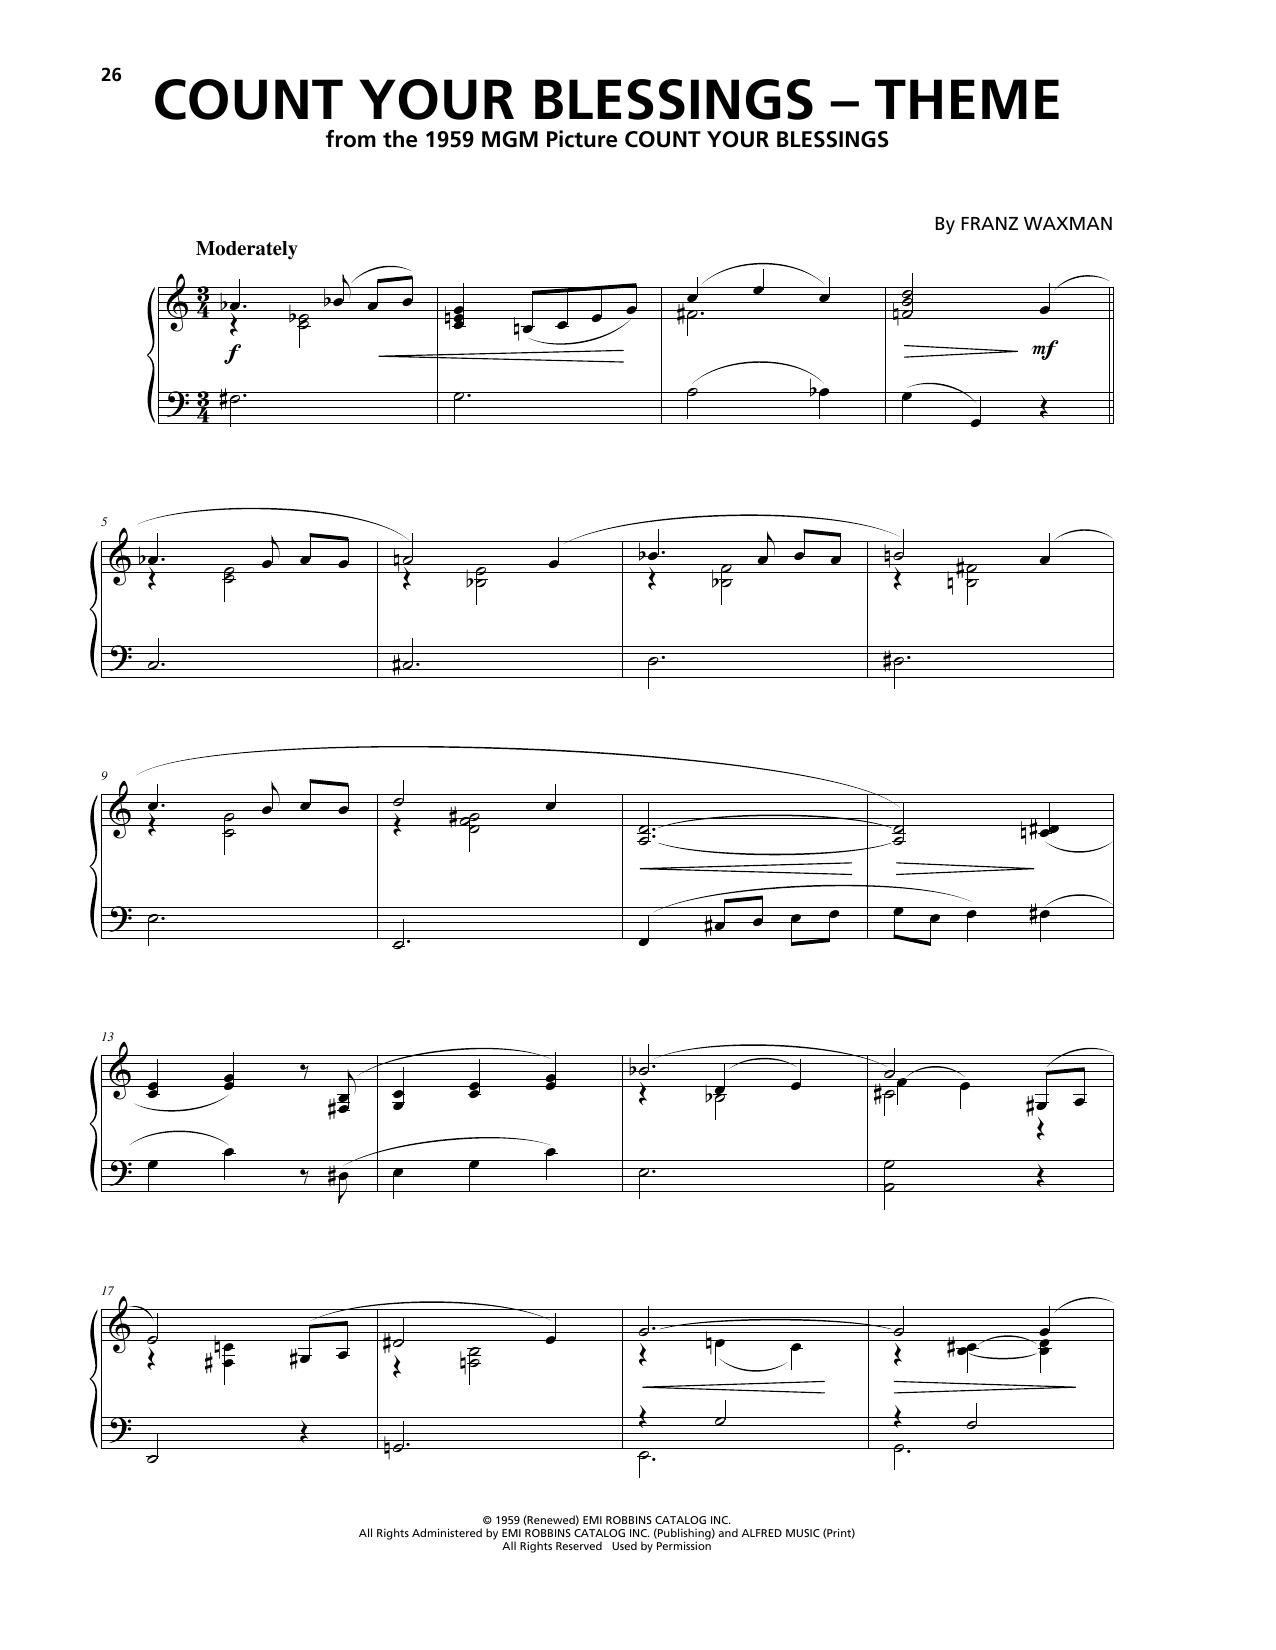 Download Franz Waxman Count Your Blessings (Theme) Sheet Music